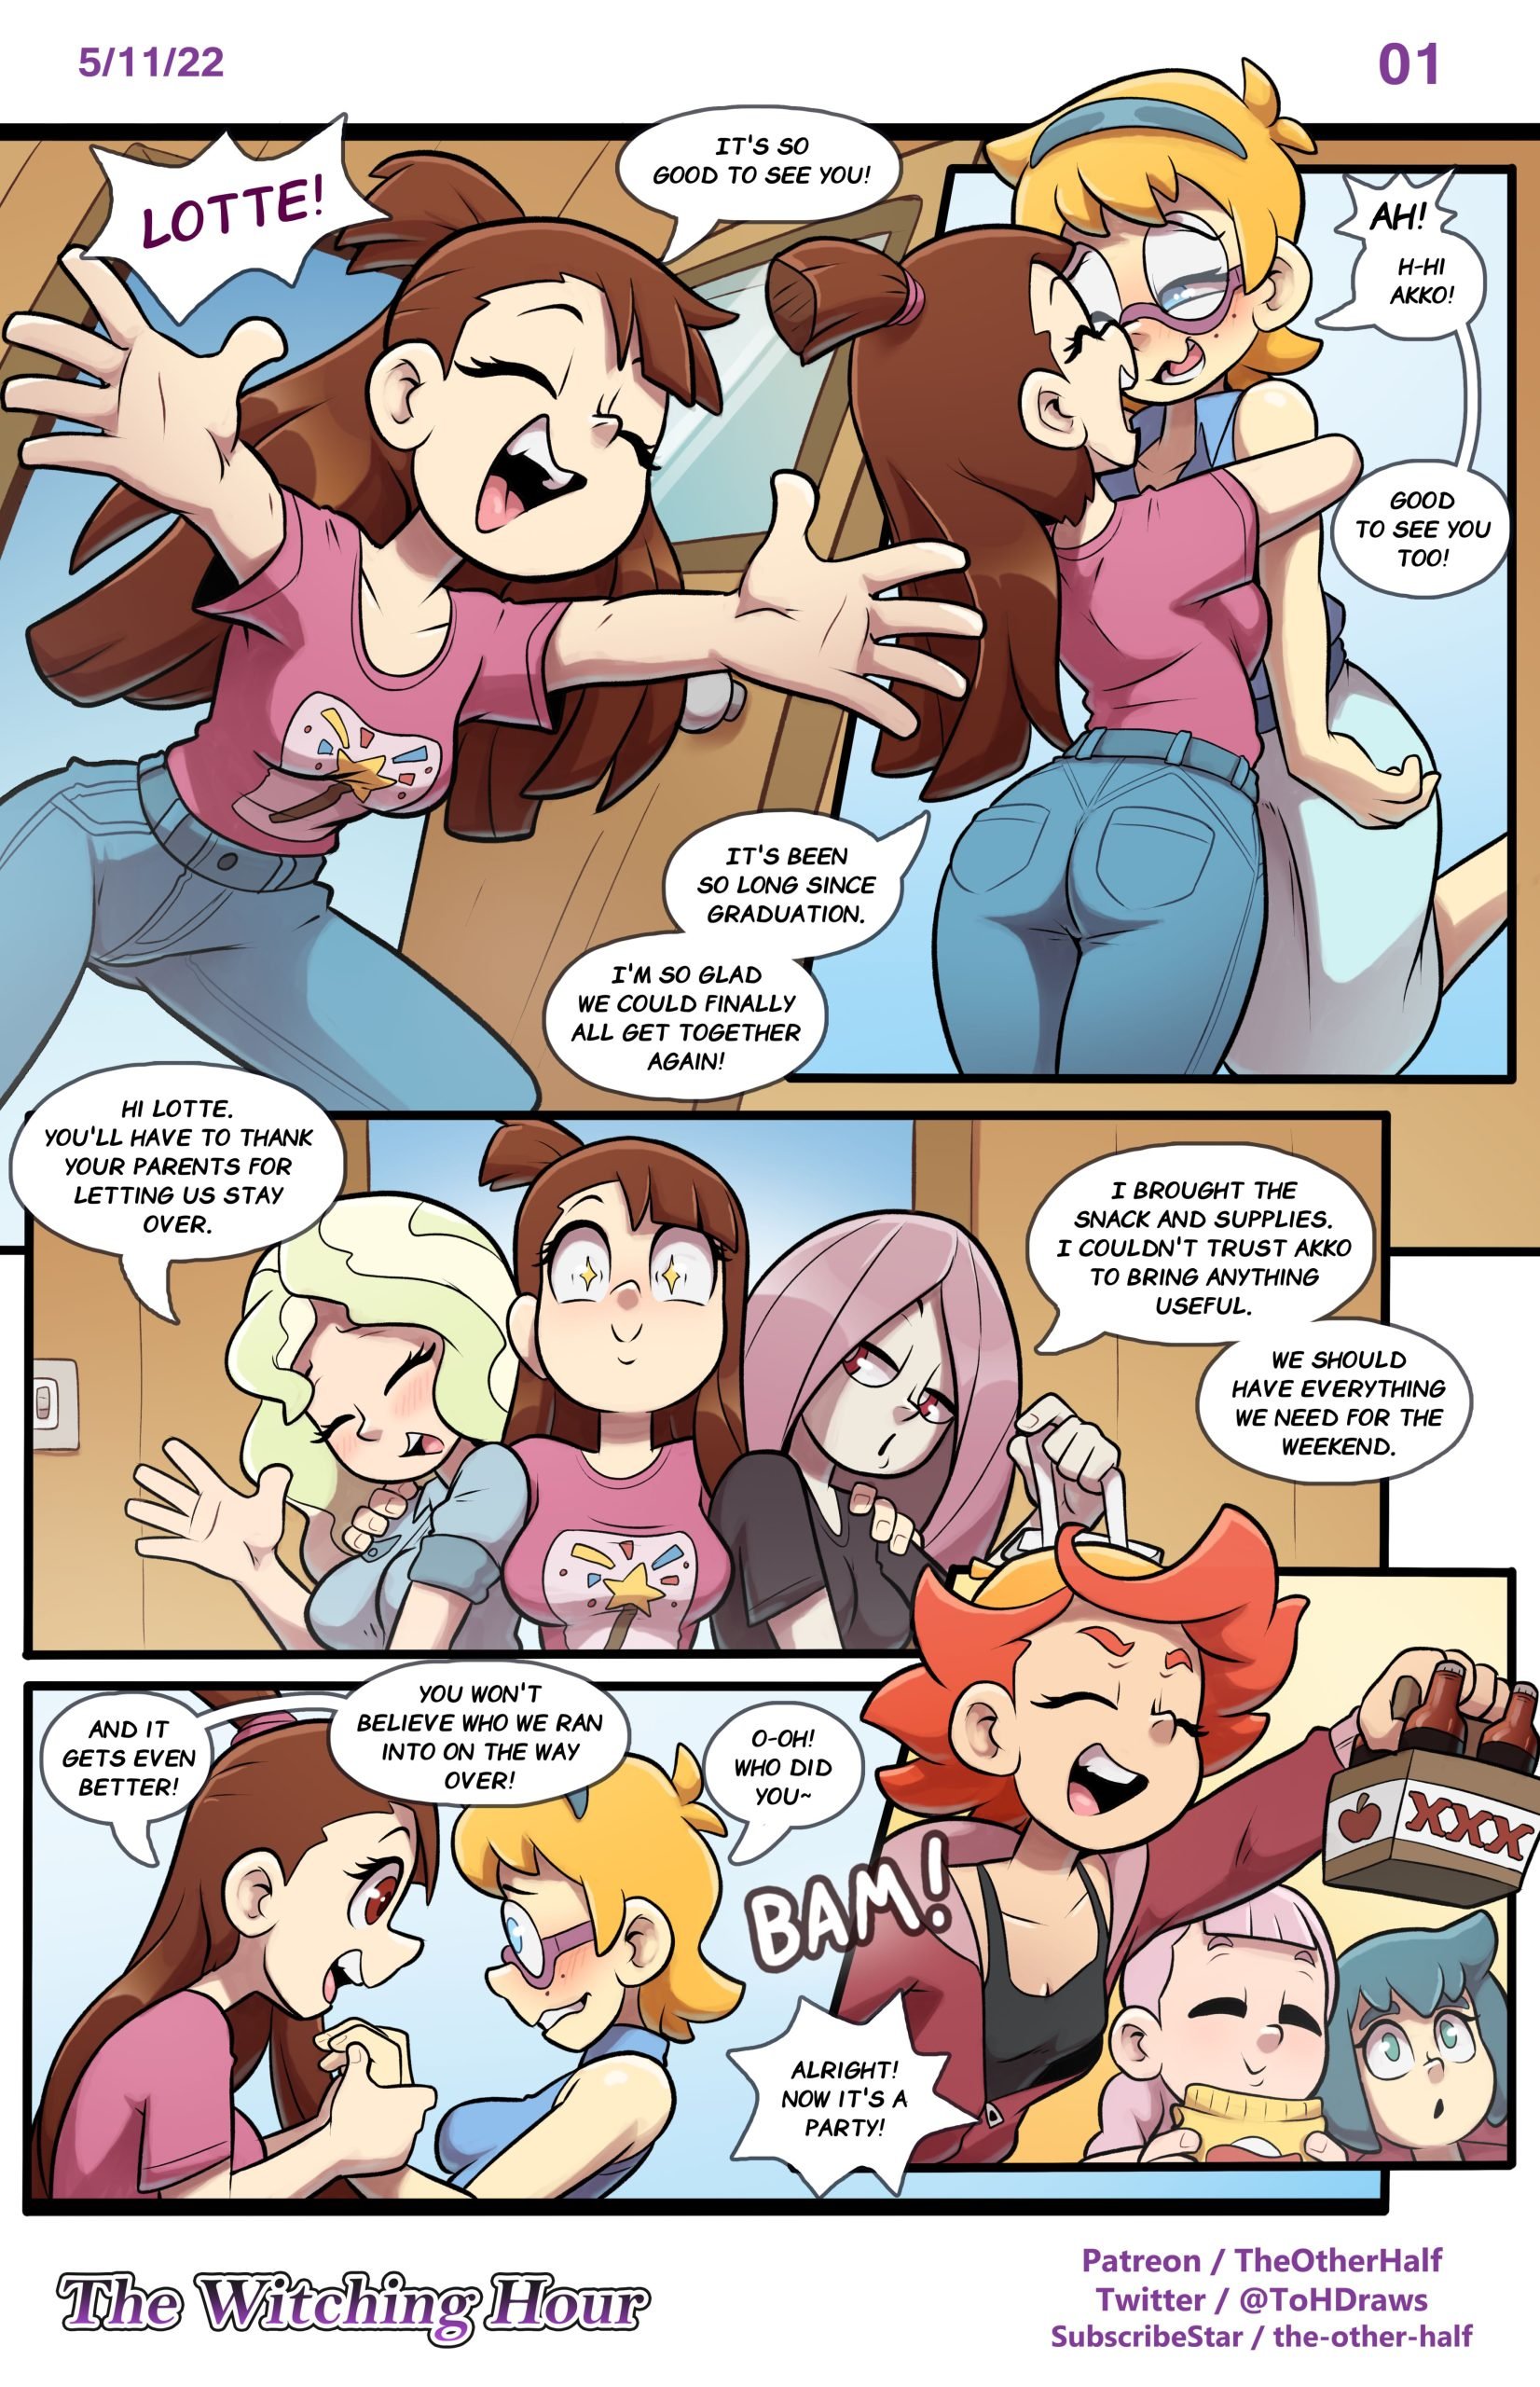 The Witching Hour (Little Witch Academia) TheOtherHalf Porn Comic image